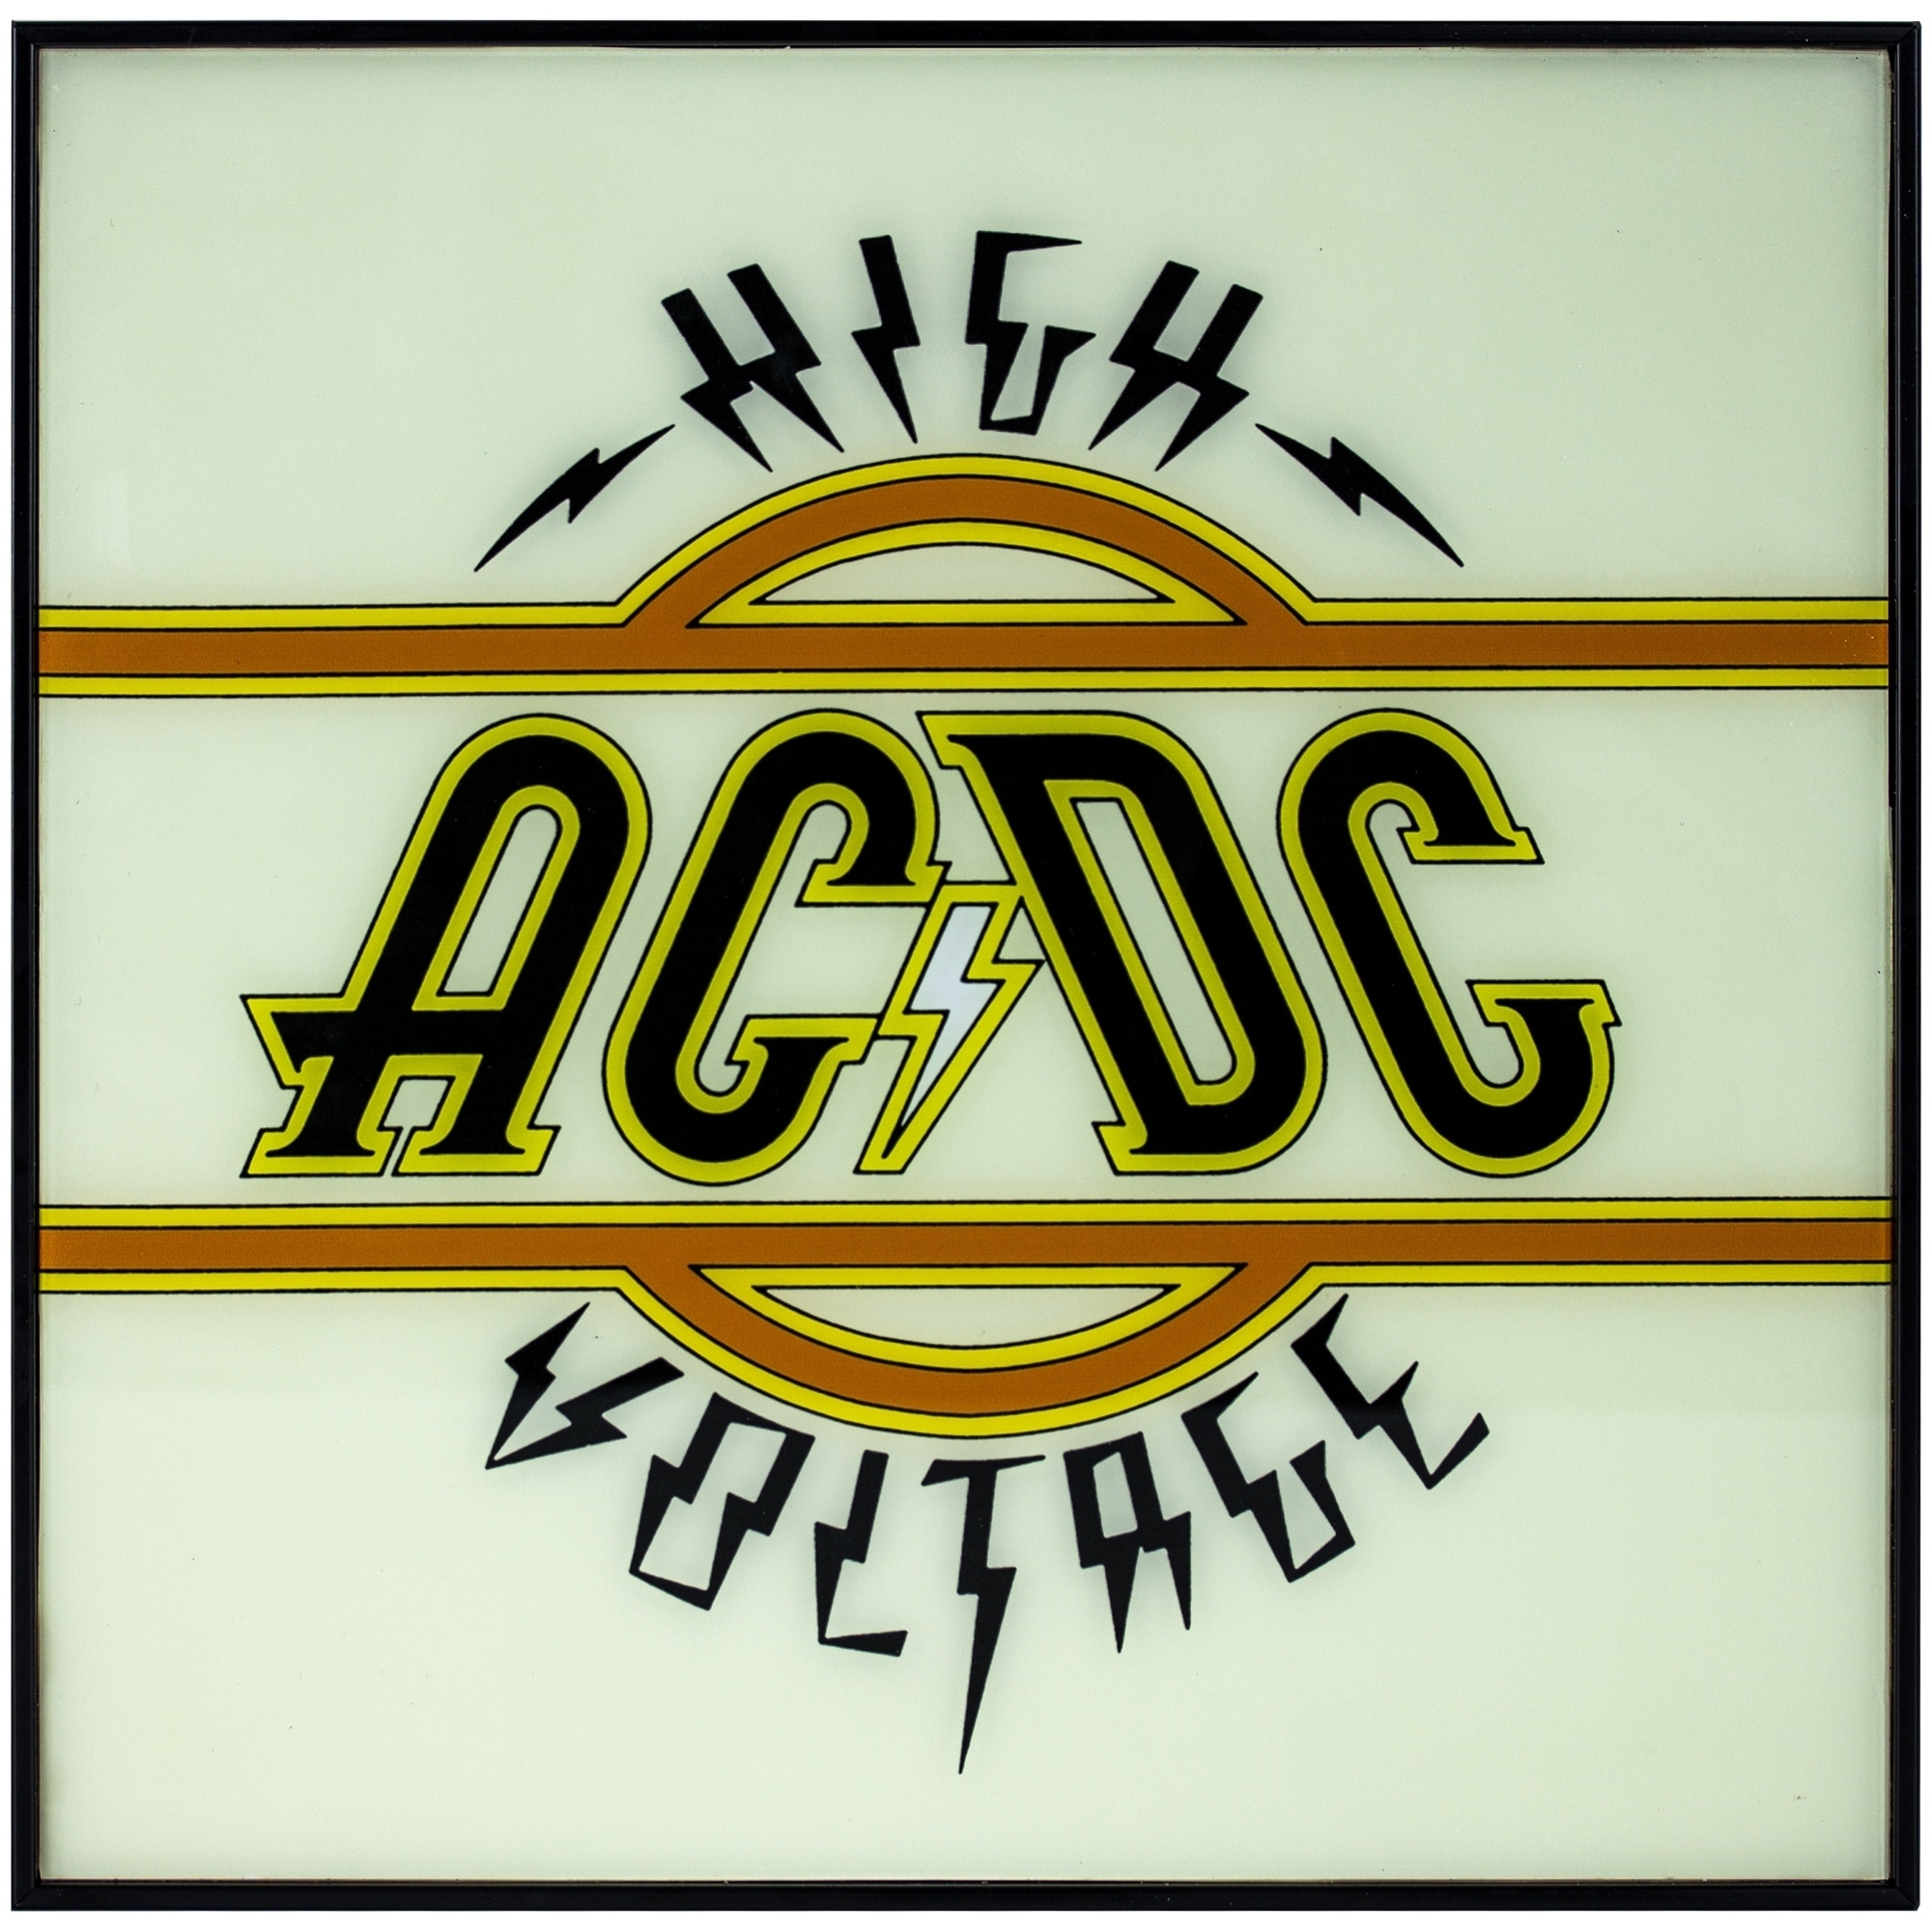 AC/DC's 'High Voltage' is the Best Purchase I Ever Made!